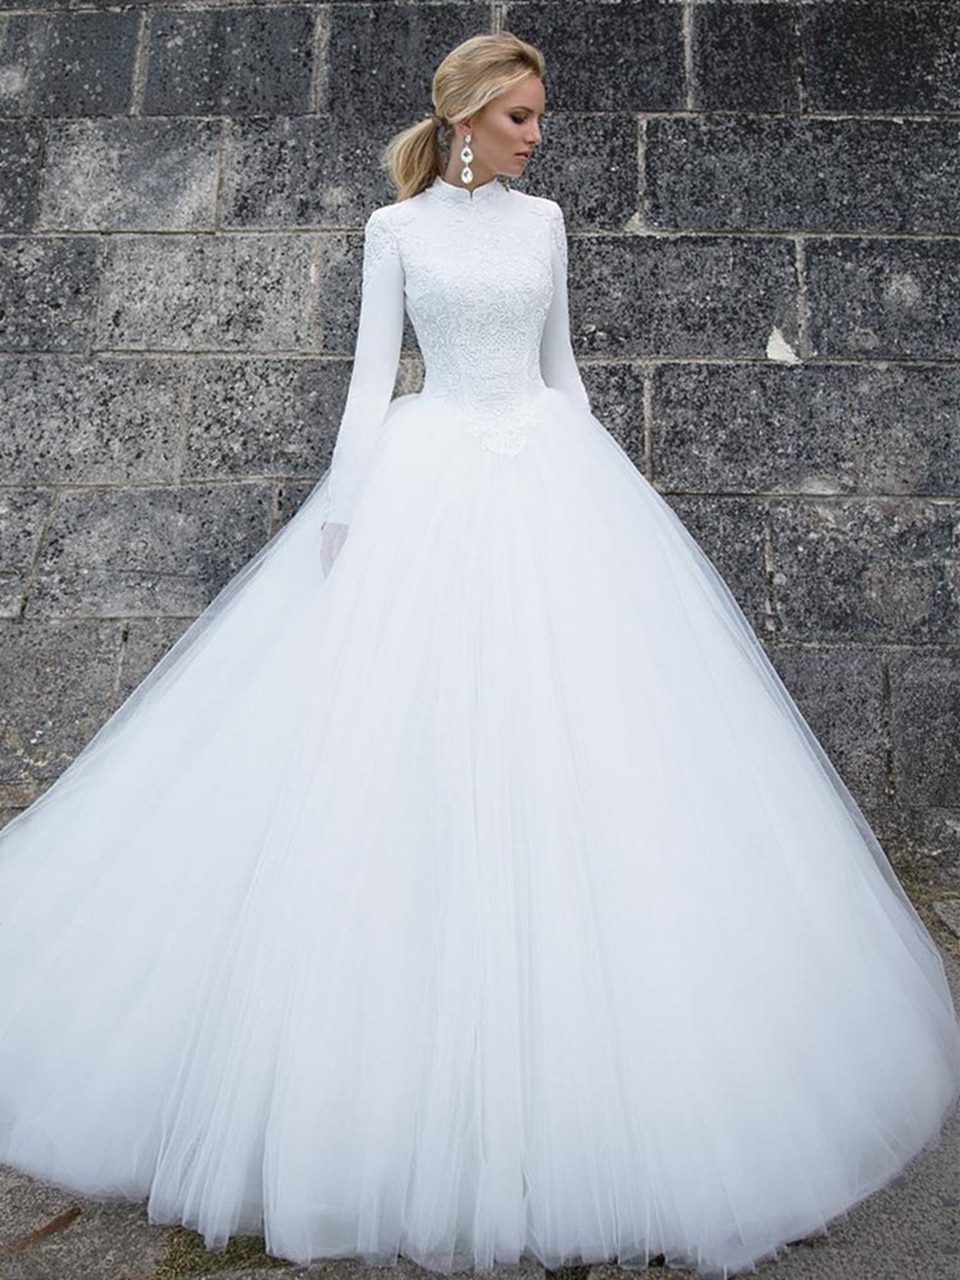 White/Ivory A-Line Long Sleeves Appliques Lace Tulle Wedding Dress